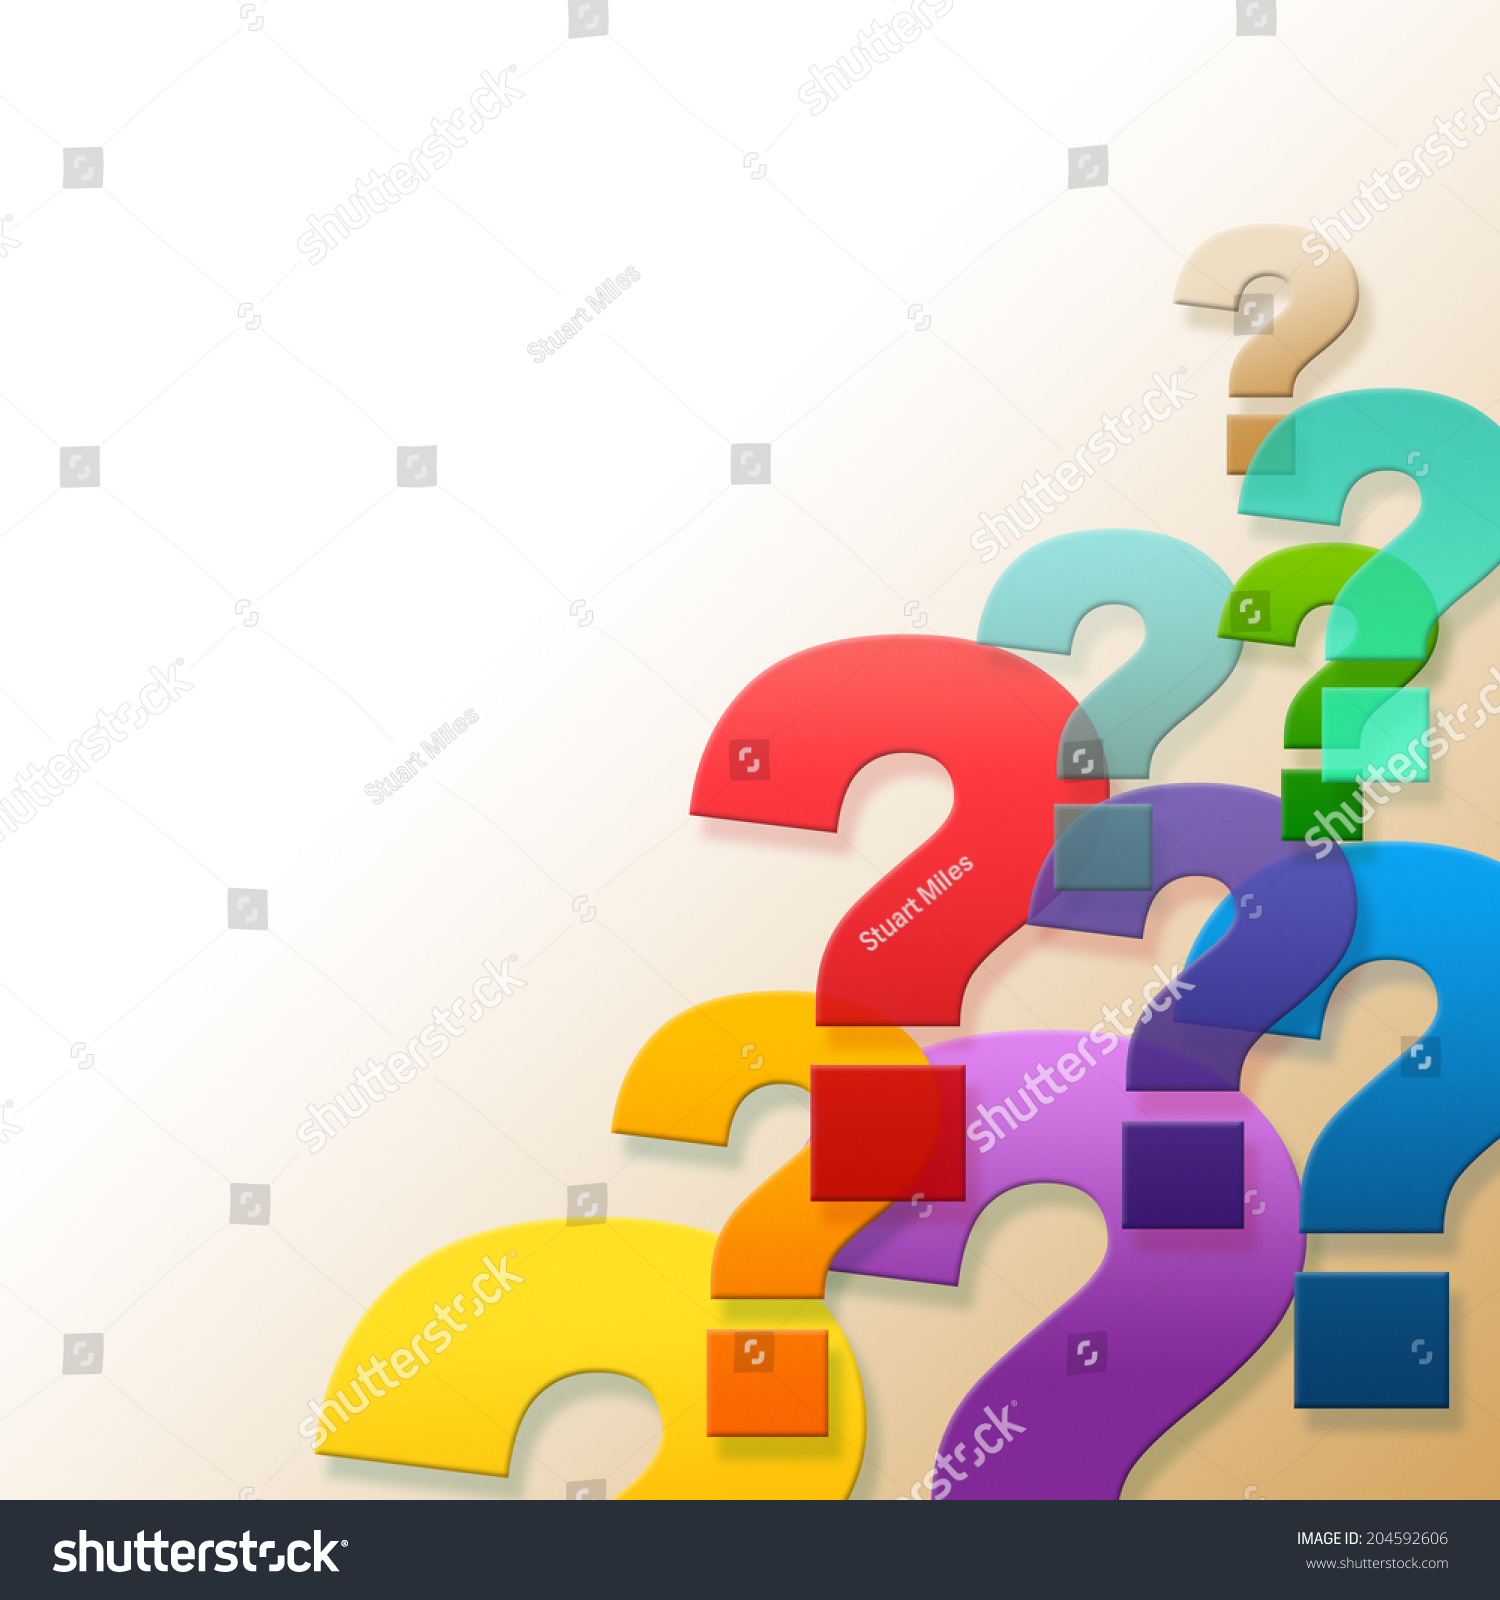 Question Marks Indicating Frequently Asked Questions Stock Illustration ...